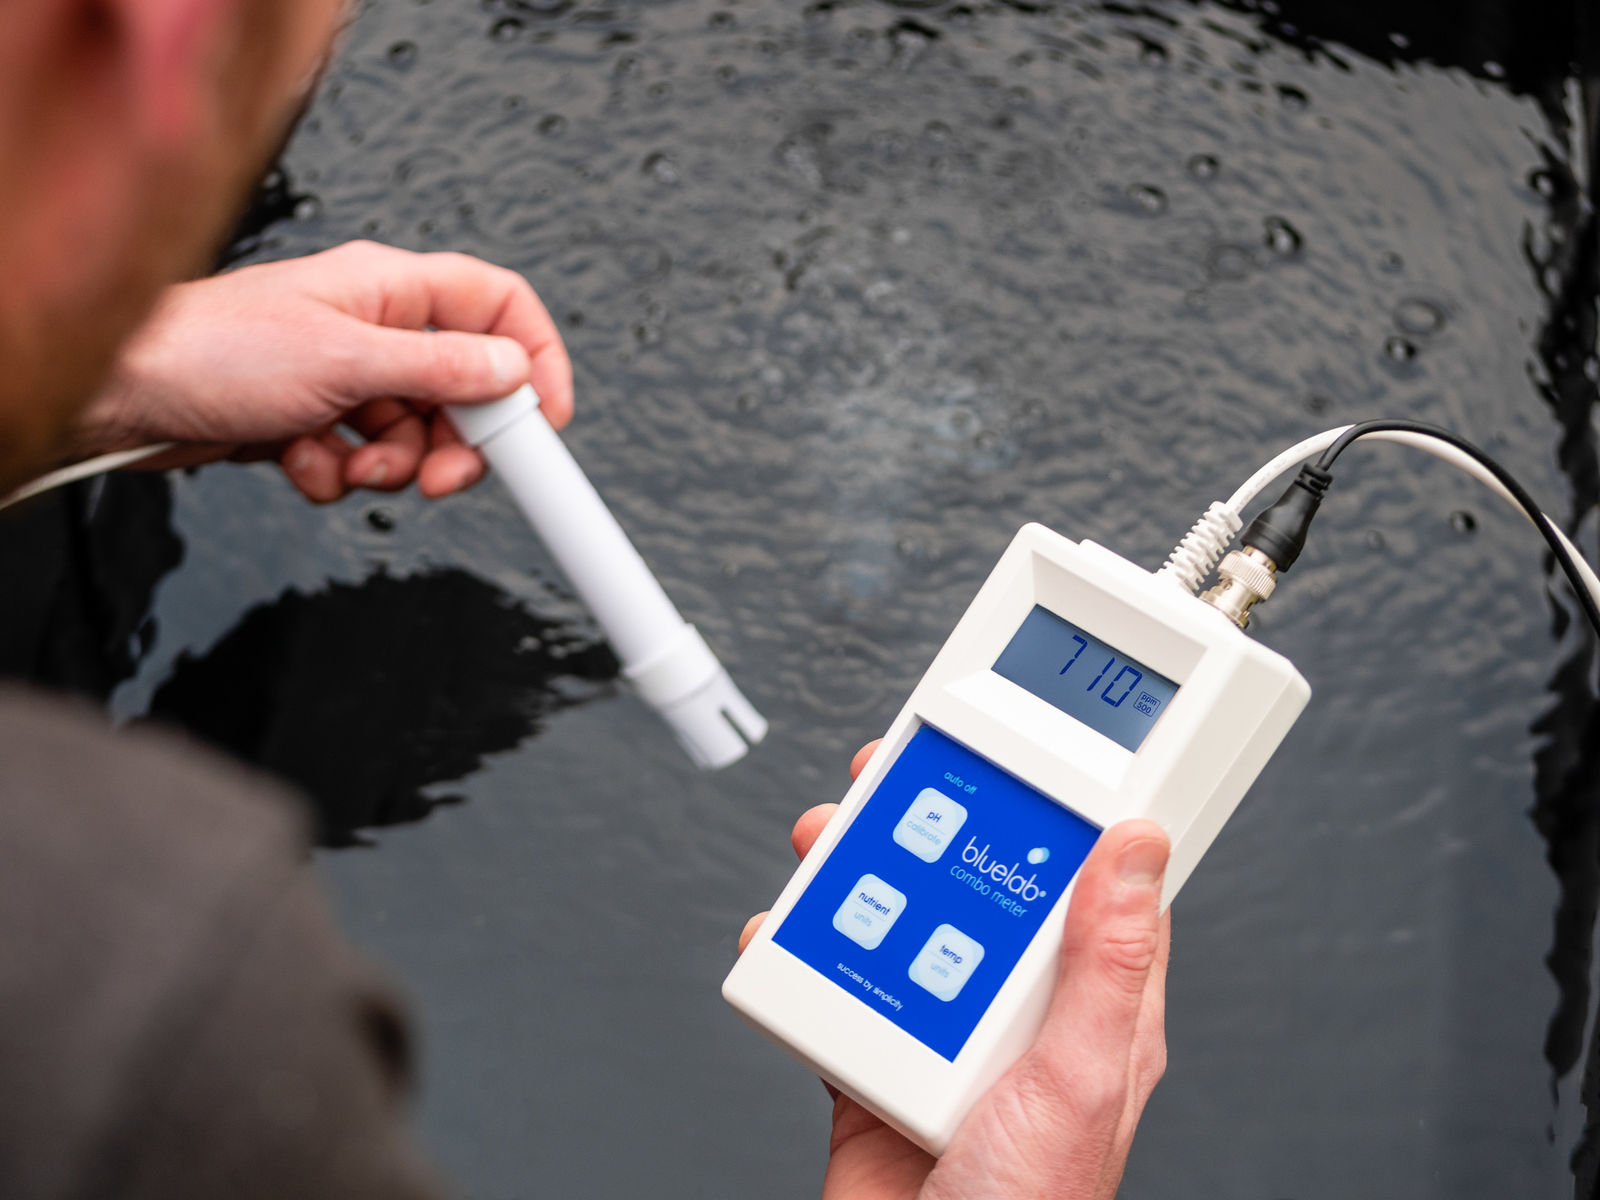 How to test water quality with a Bluelab meter